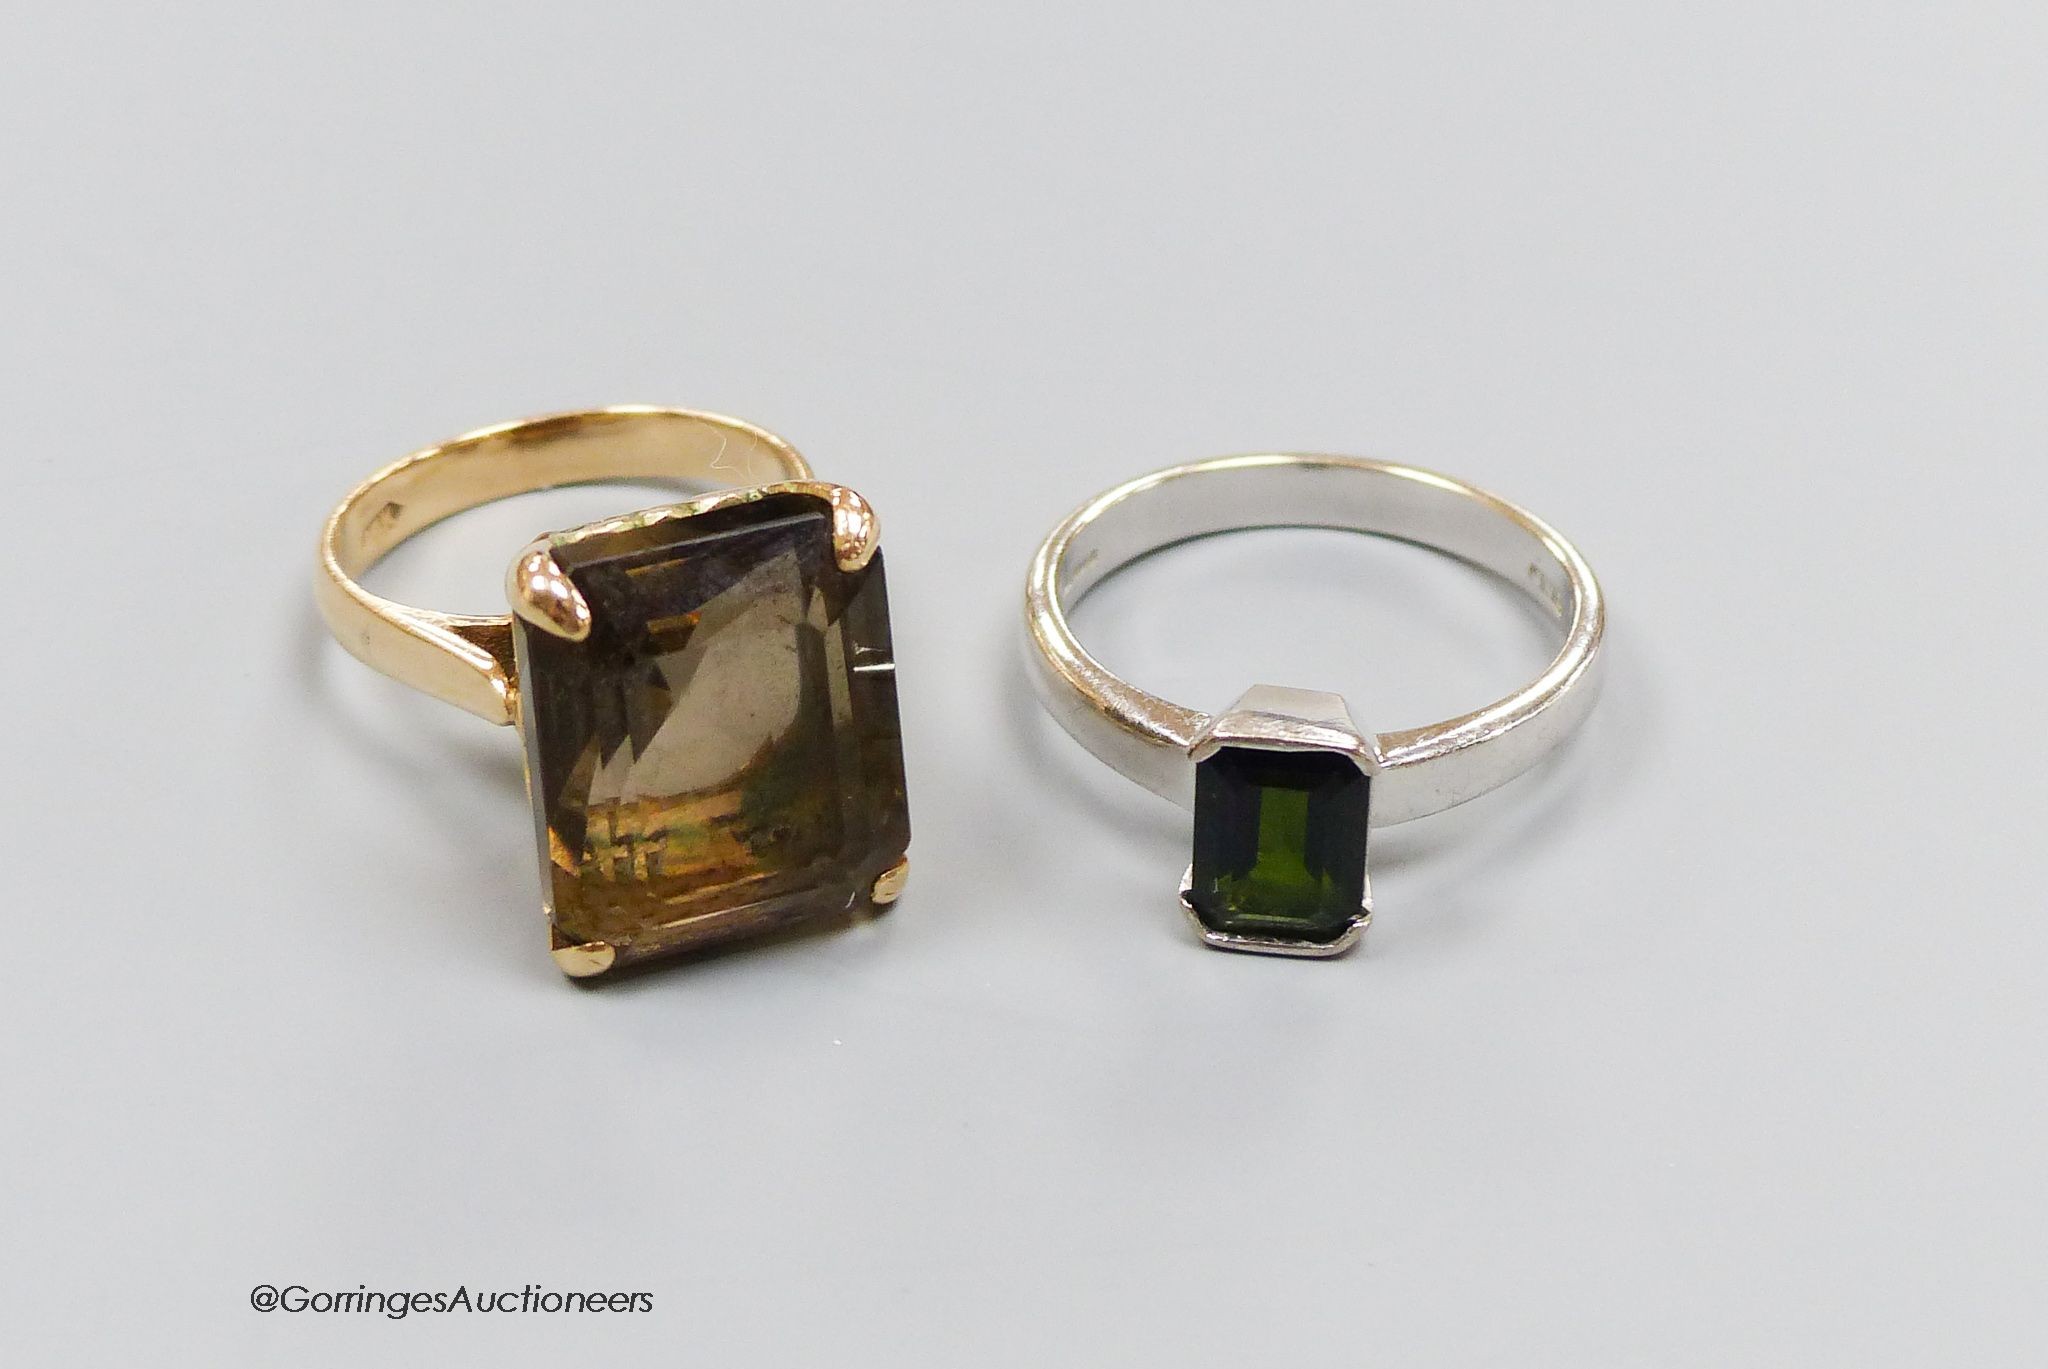 An 18ct white gold and tourmaline ring, size Q, gross 5g, and a 14k gold and smoky quartz ring, size M, gross 7g.